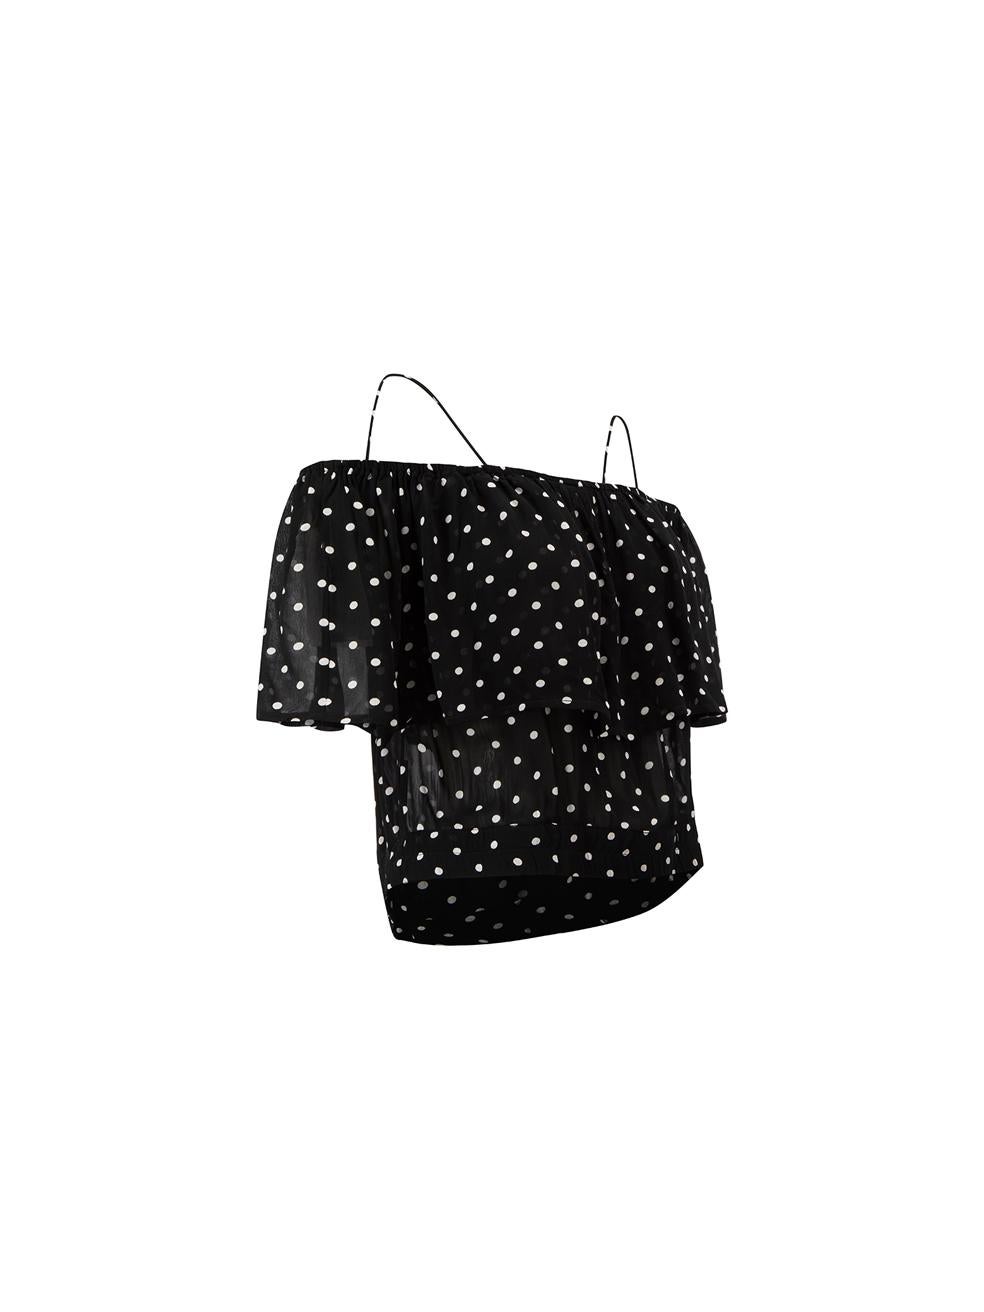 CONDITION is Very good. Hardly any visible wear to top is evident on this used Ganni designer resale item. 



Details


Black

Viscose

Off the shoulder top

Cropped length

Polkadot pattern

Shoulder strapped

Elasticated on neckline and